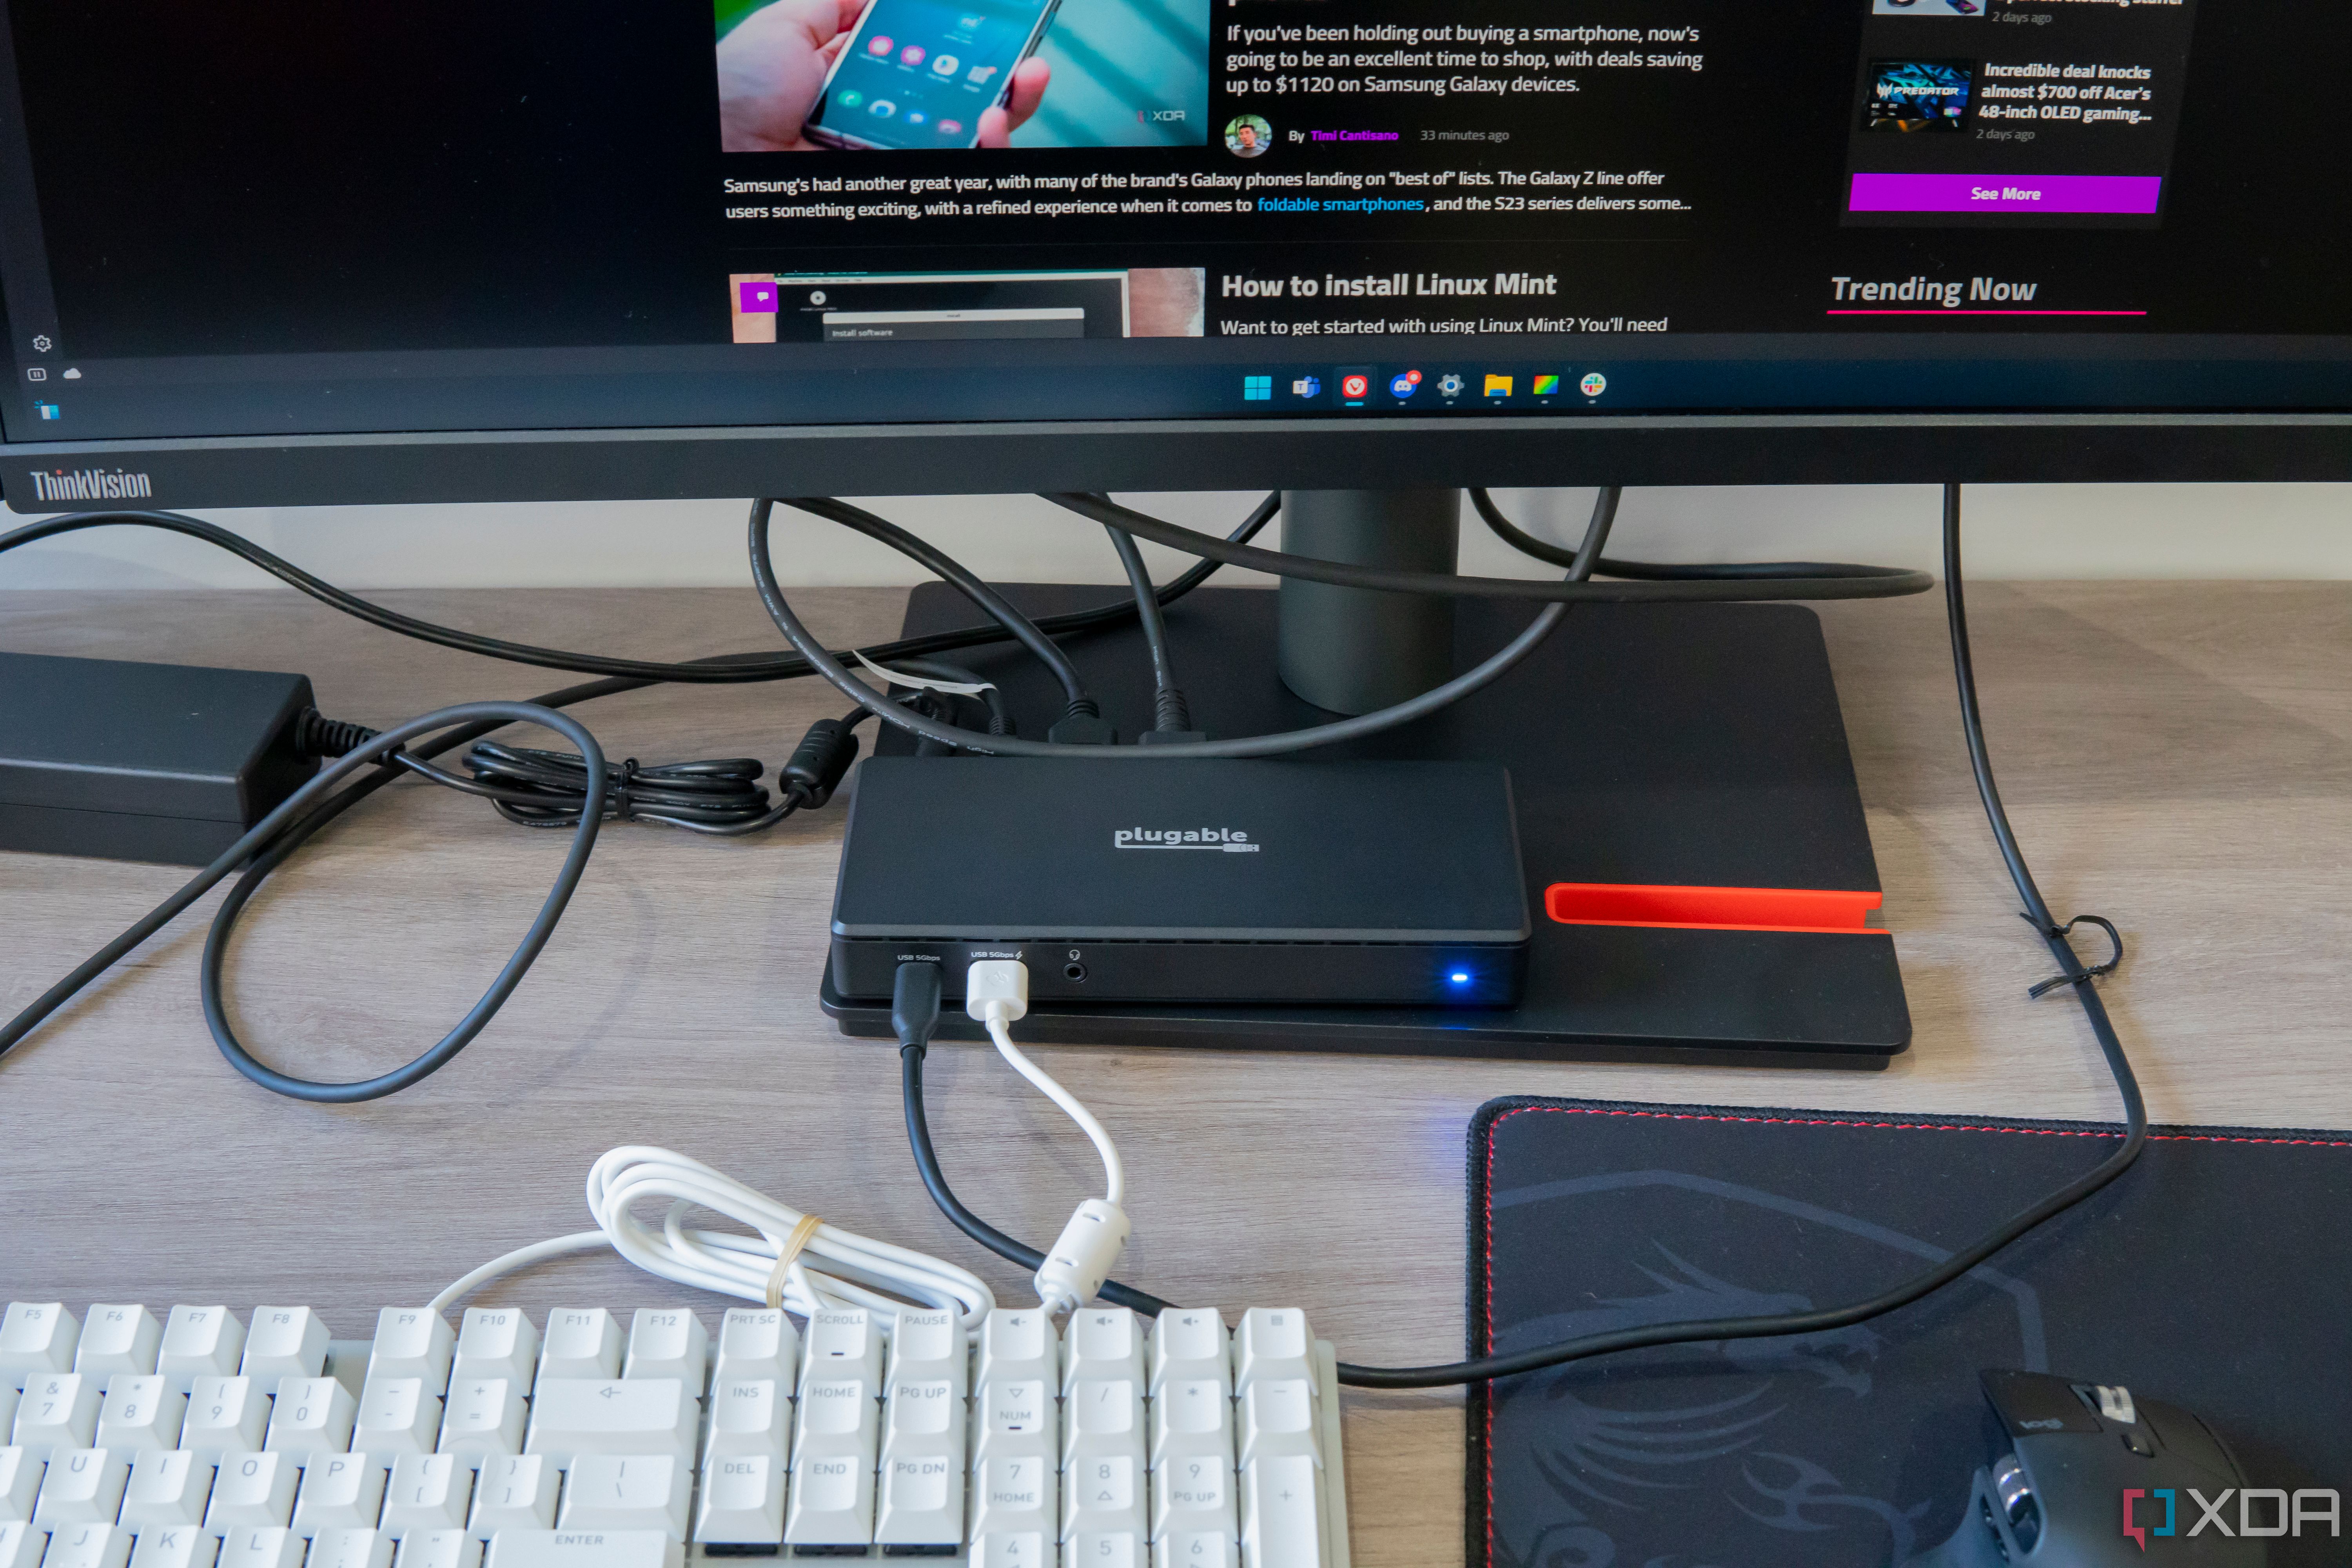 A Plugable dock connected to multiple peripherals on a desk, including a keyboard, mouse, and monitor